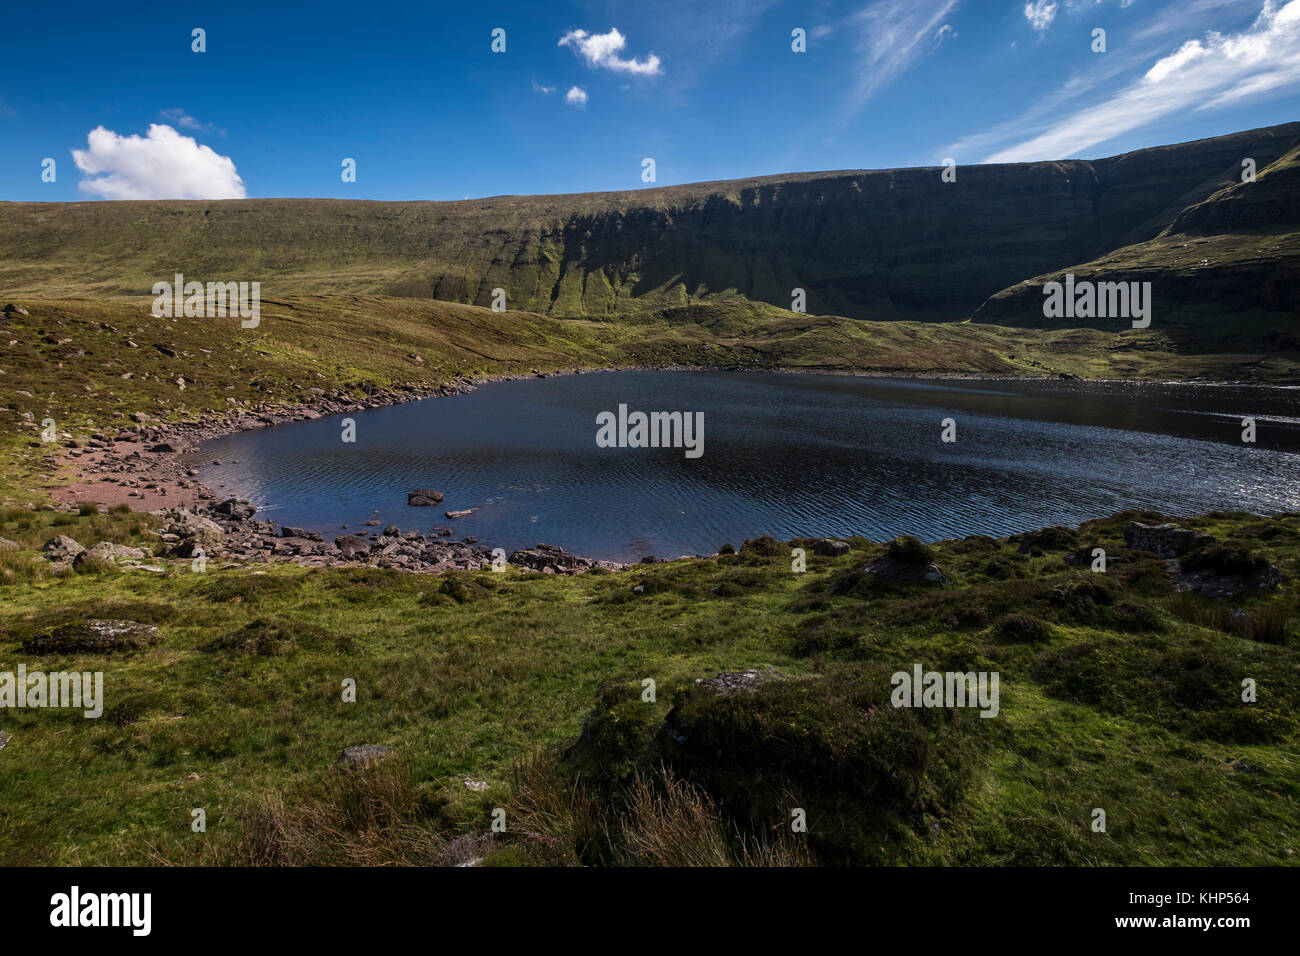 Lake Muskry a corrie lake formed by glacial erosion in the Glen of Aherlow, Galtee mountains, Tipperary, Ireland Stock Photo